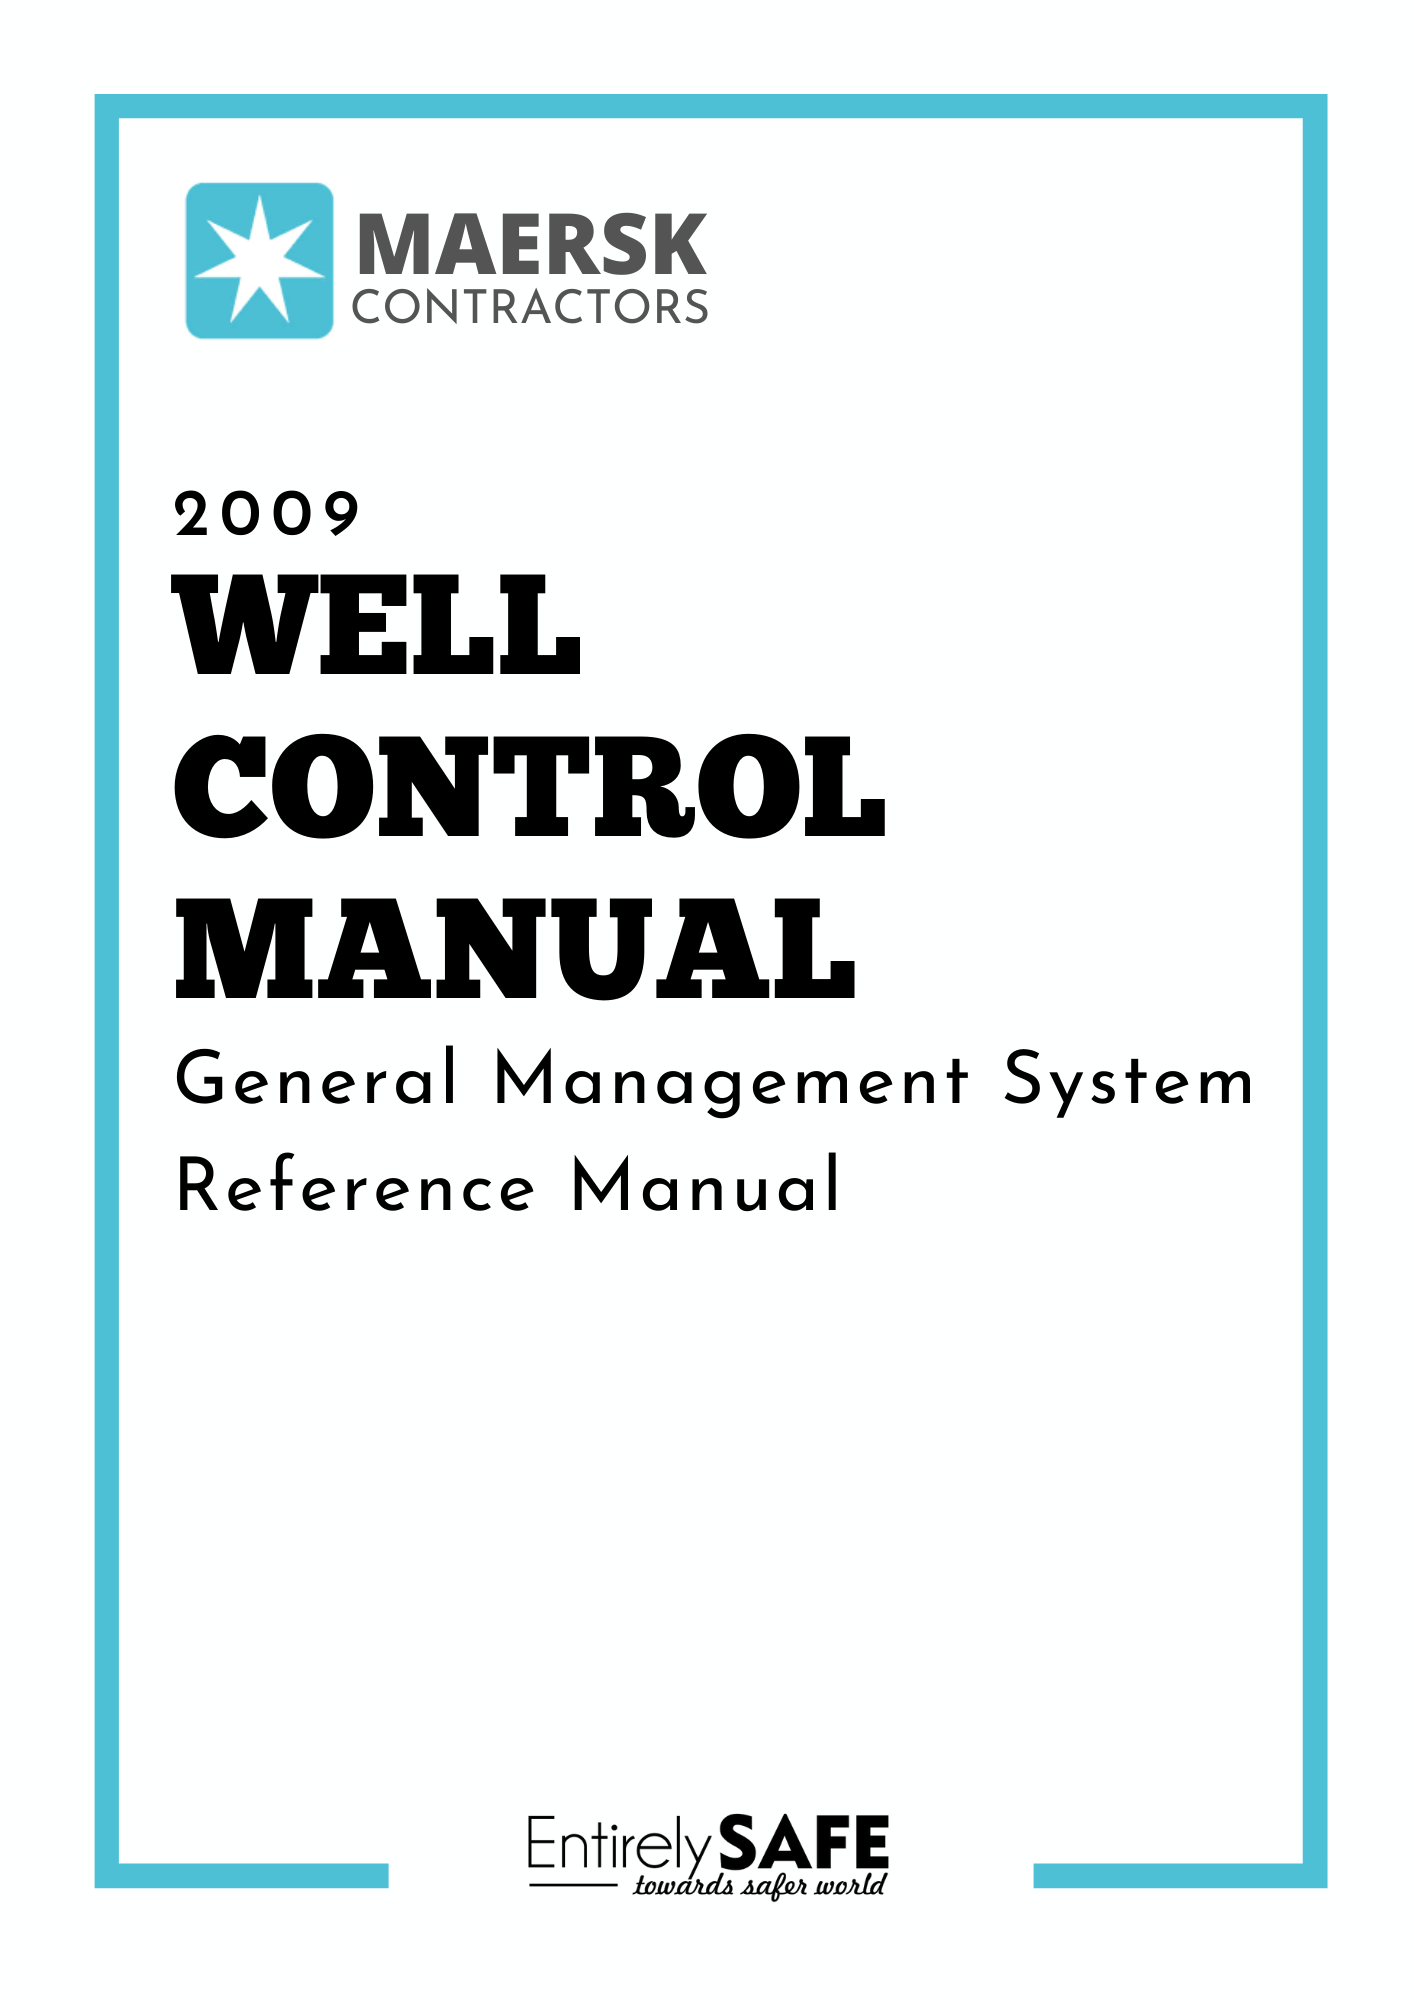 139-Download-FREE-Well-Control-Manual-Maersk-Contractors.png